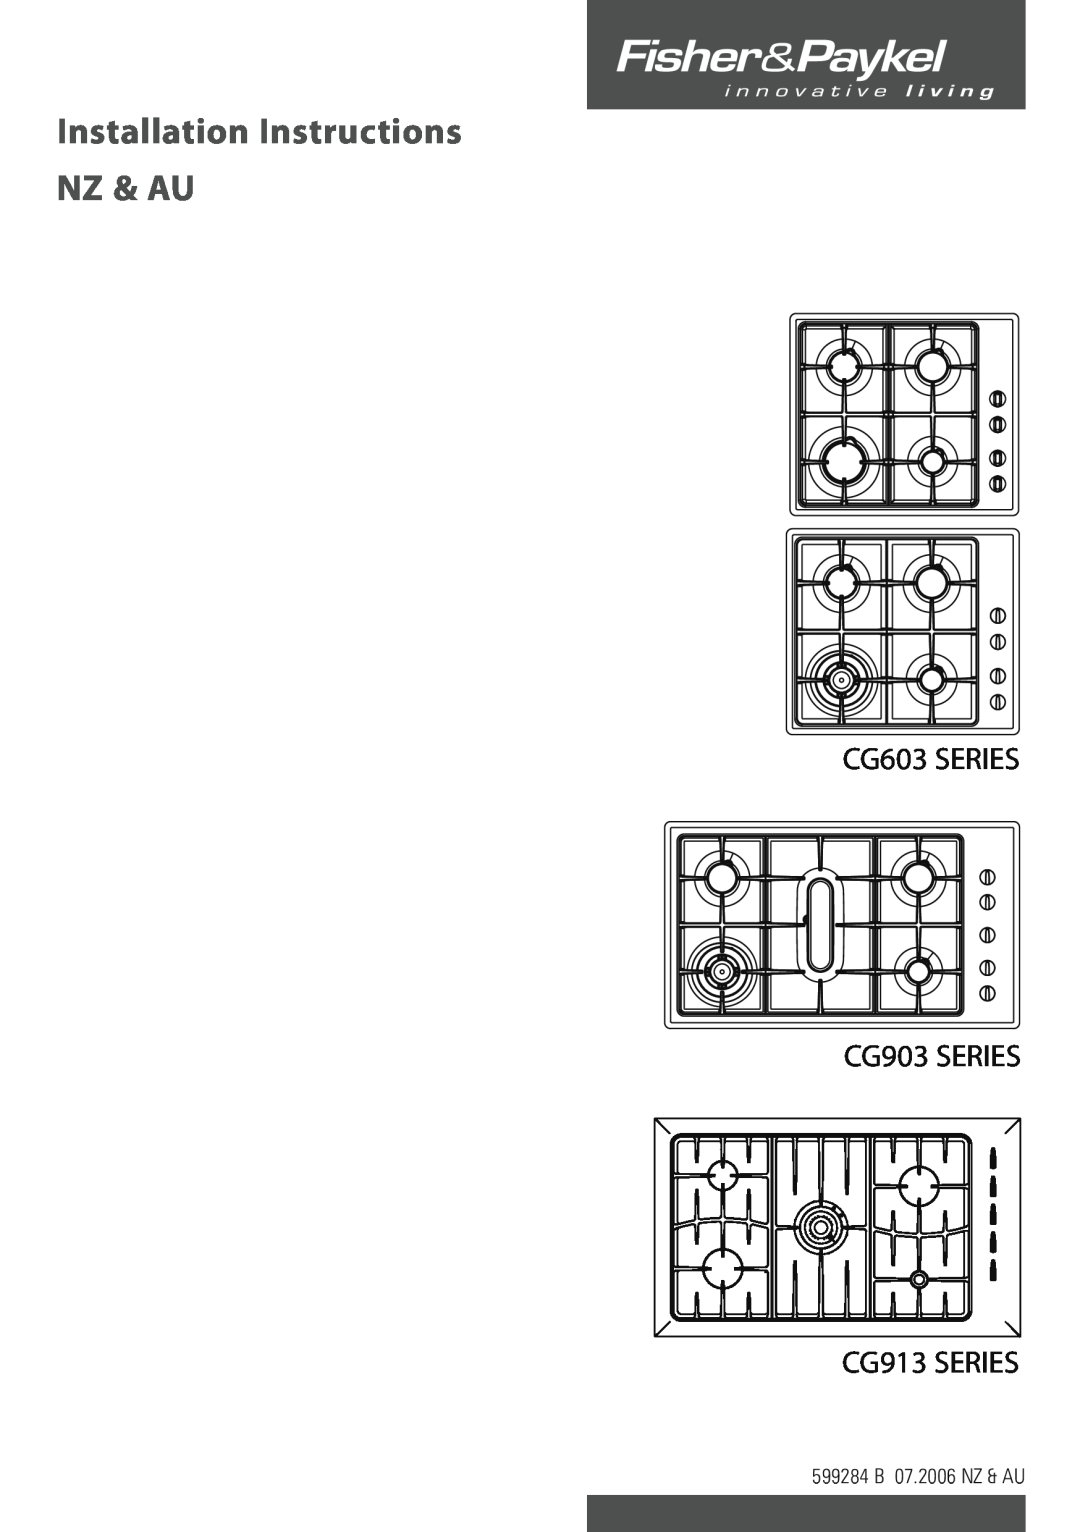 Fisher & Paykel installation instructions Installation Instructions NZ & AU, CG603 SERIES CG903 SERIES CG913 SERIES 